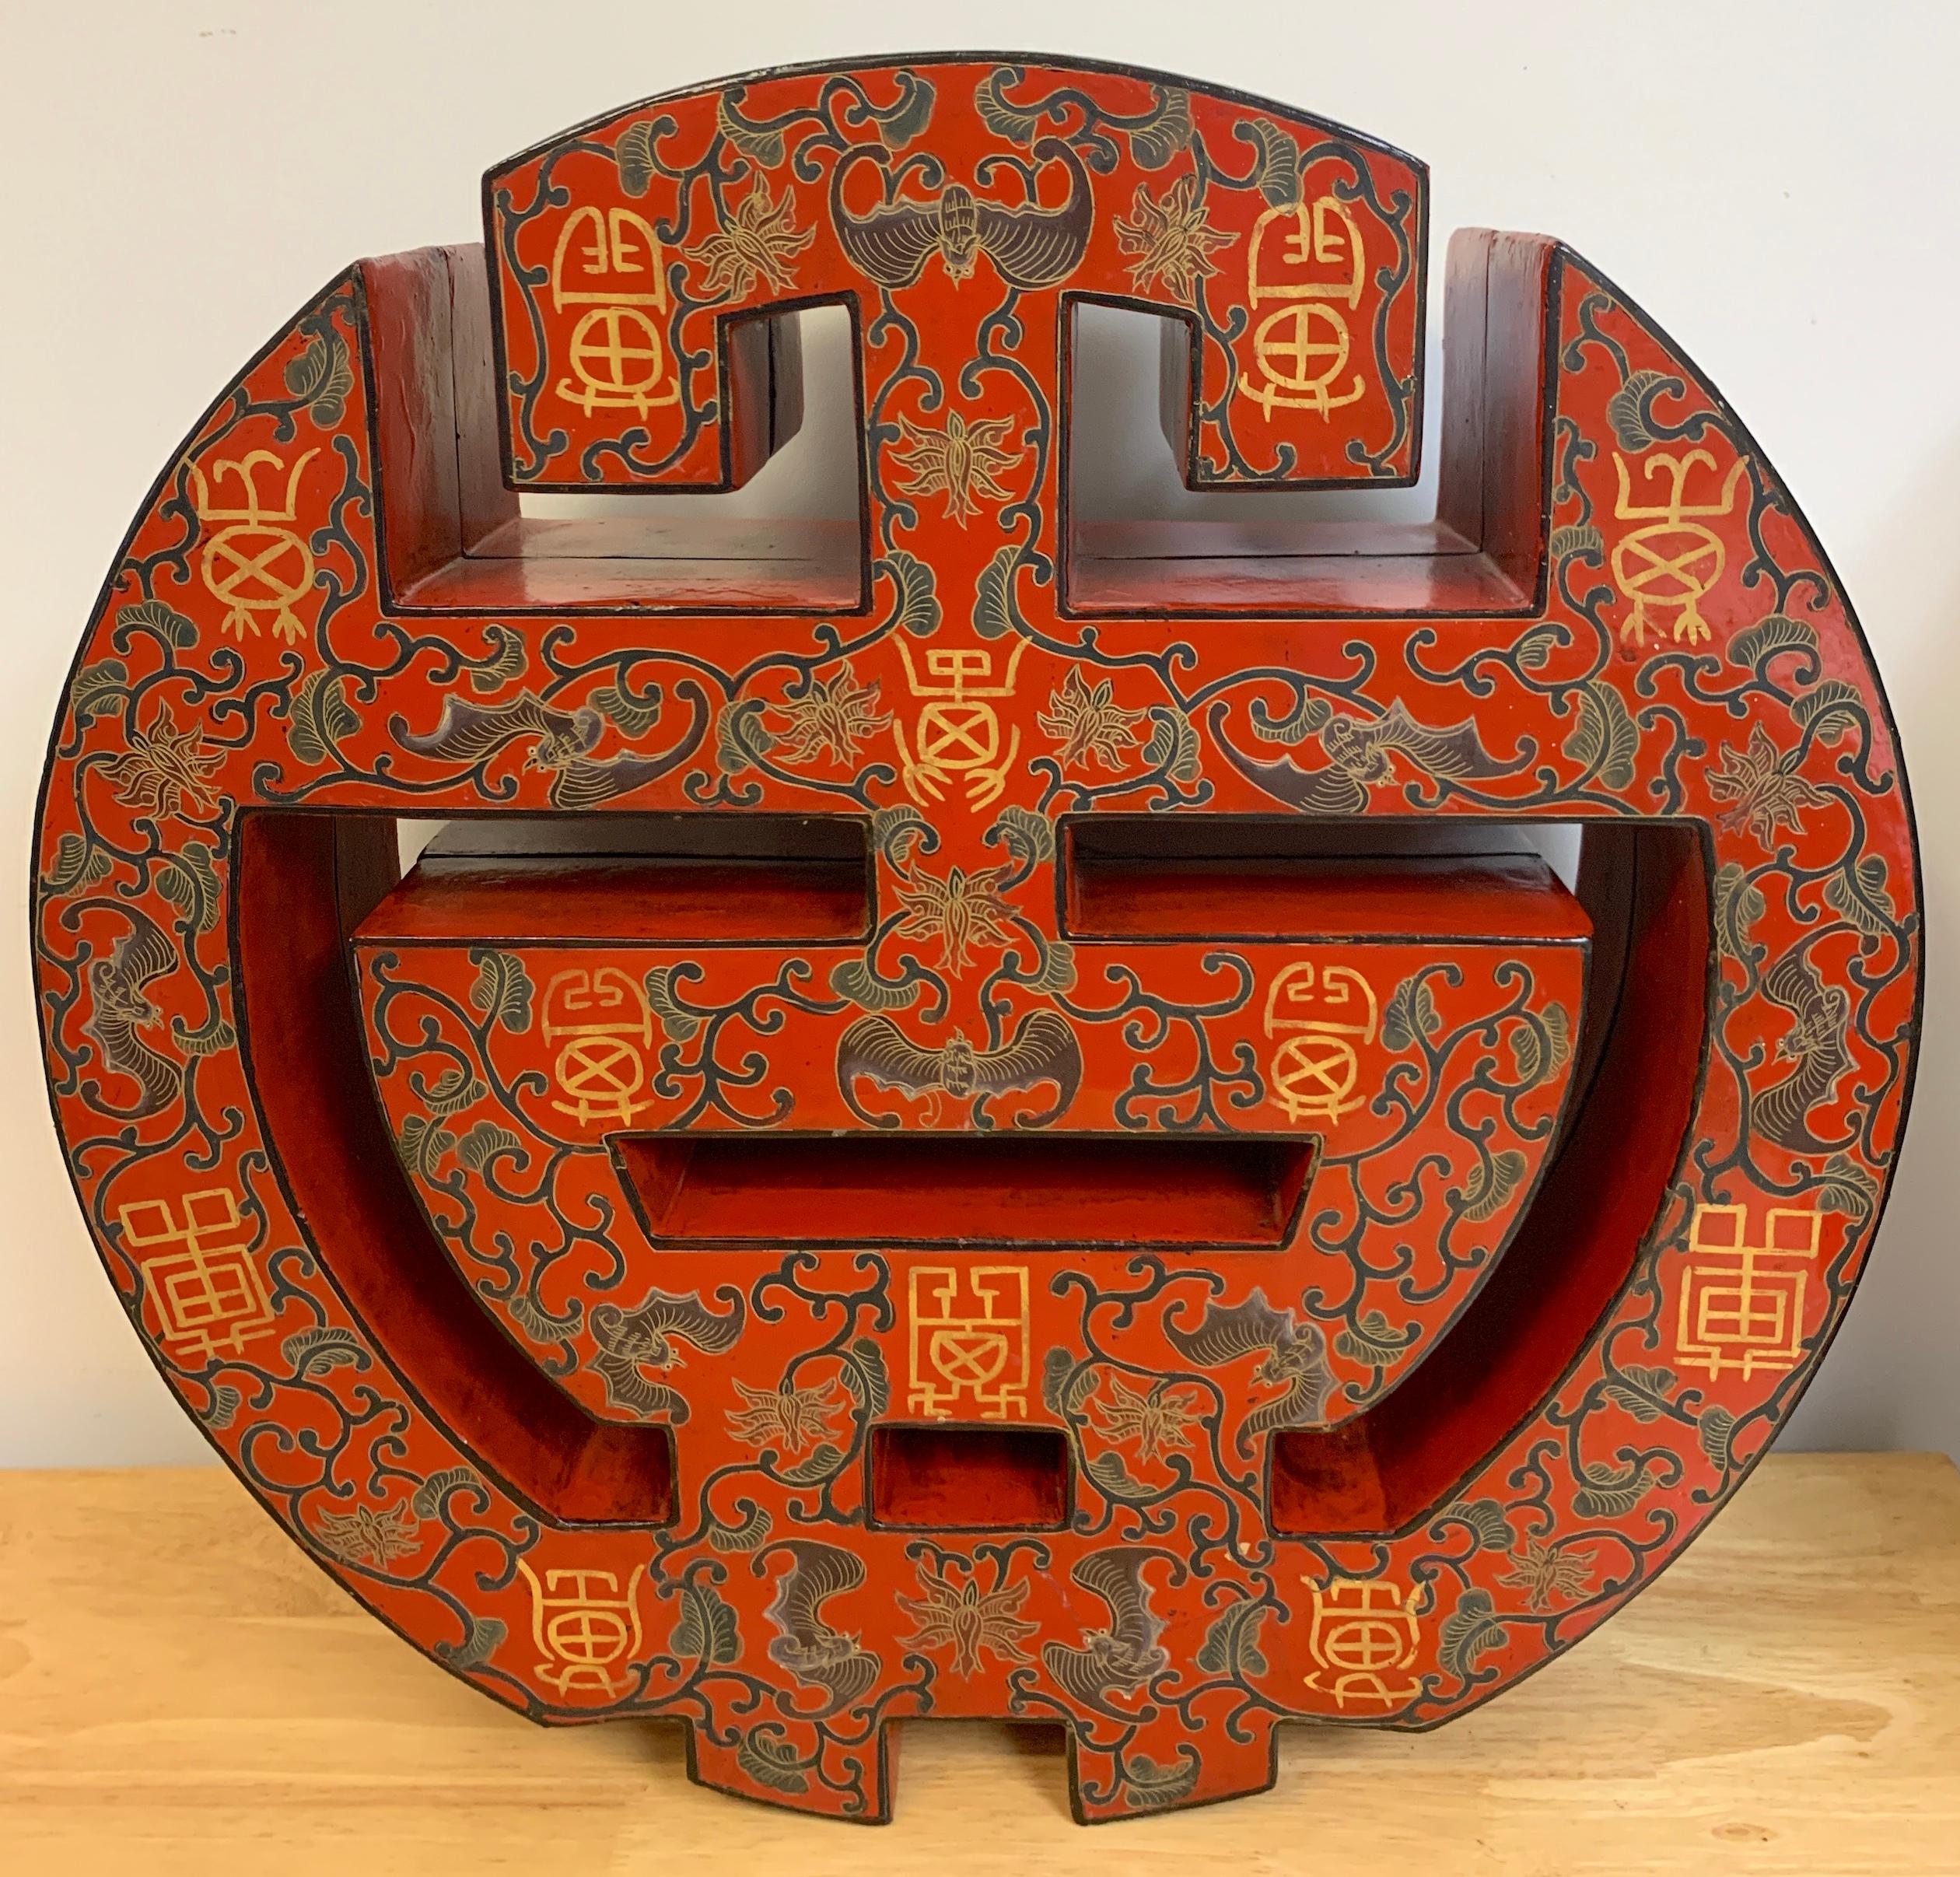 Large Chinese Export red lacquer character box, sculptural, well executed Chinese two part lacquer table box. 
Decorated with vines, symbols and bats. Unmarked. 

